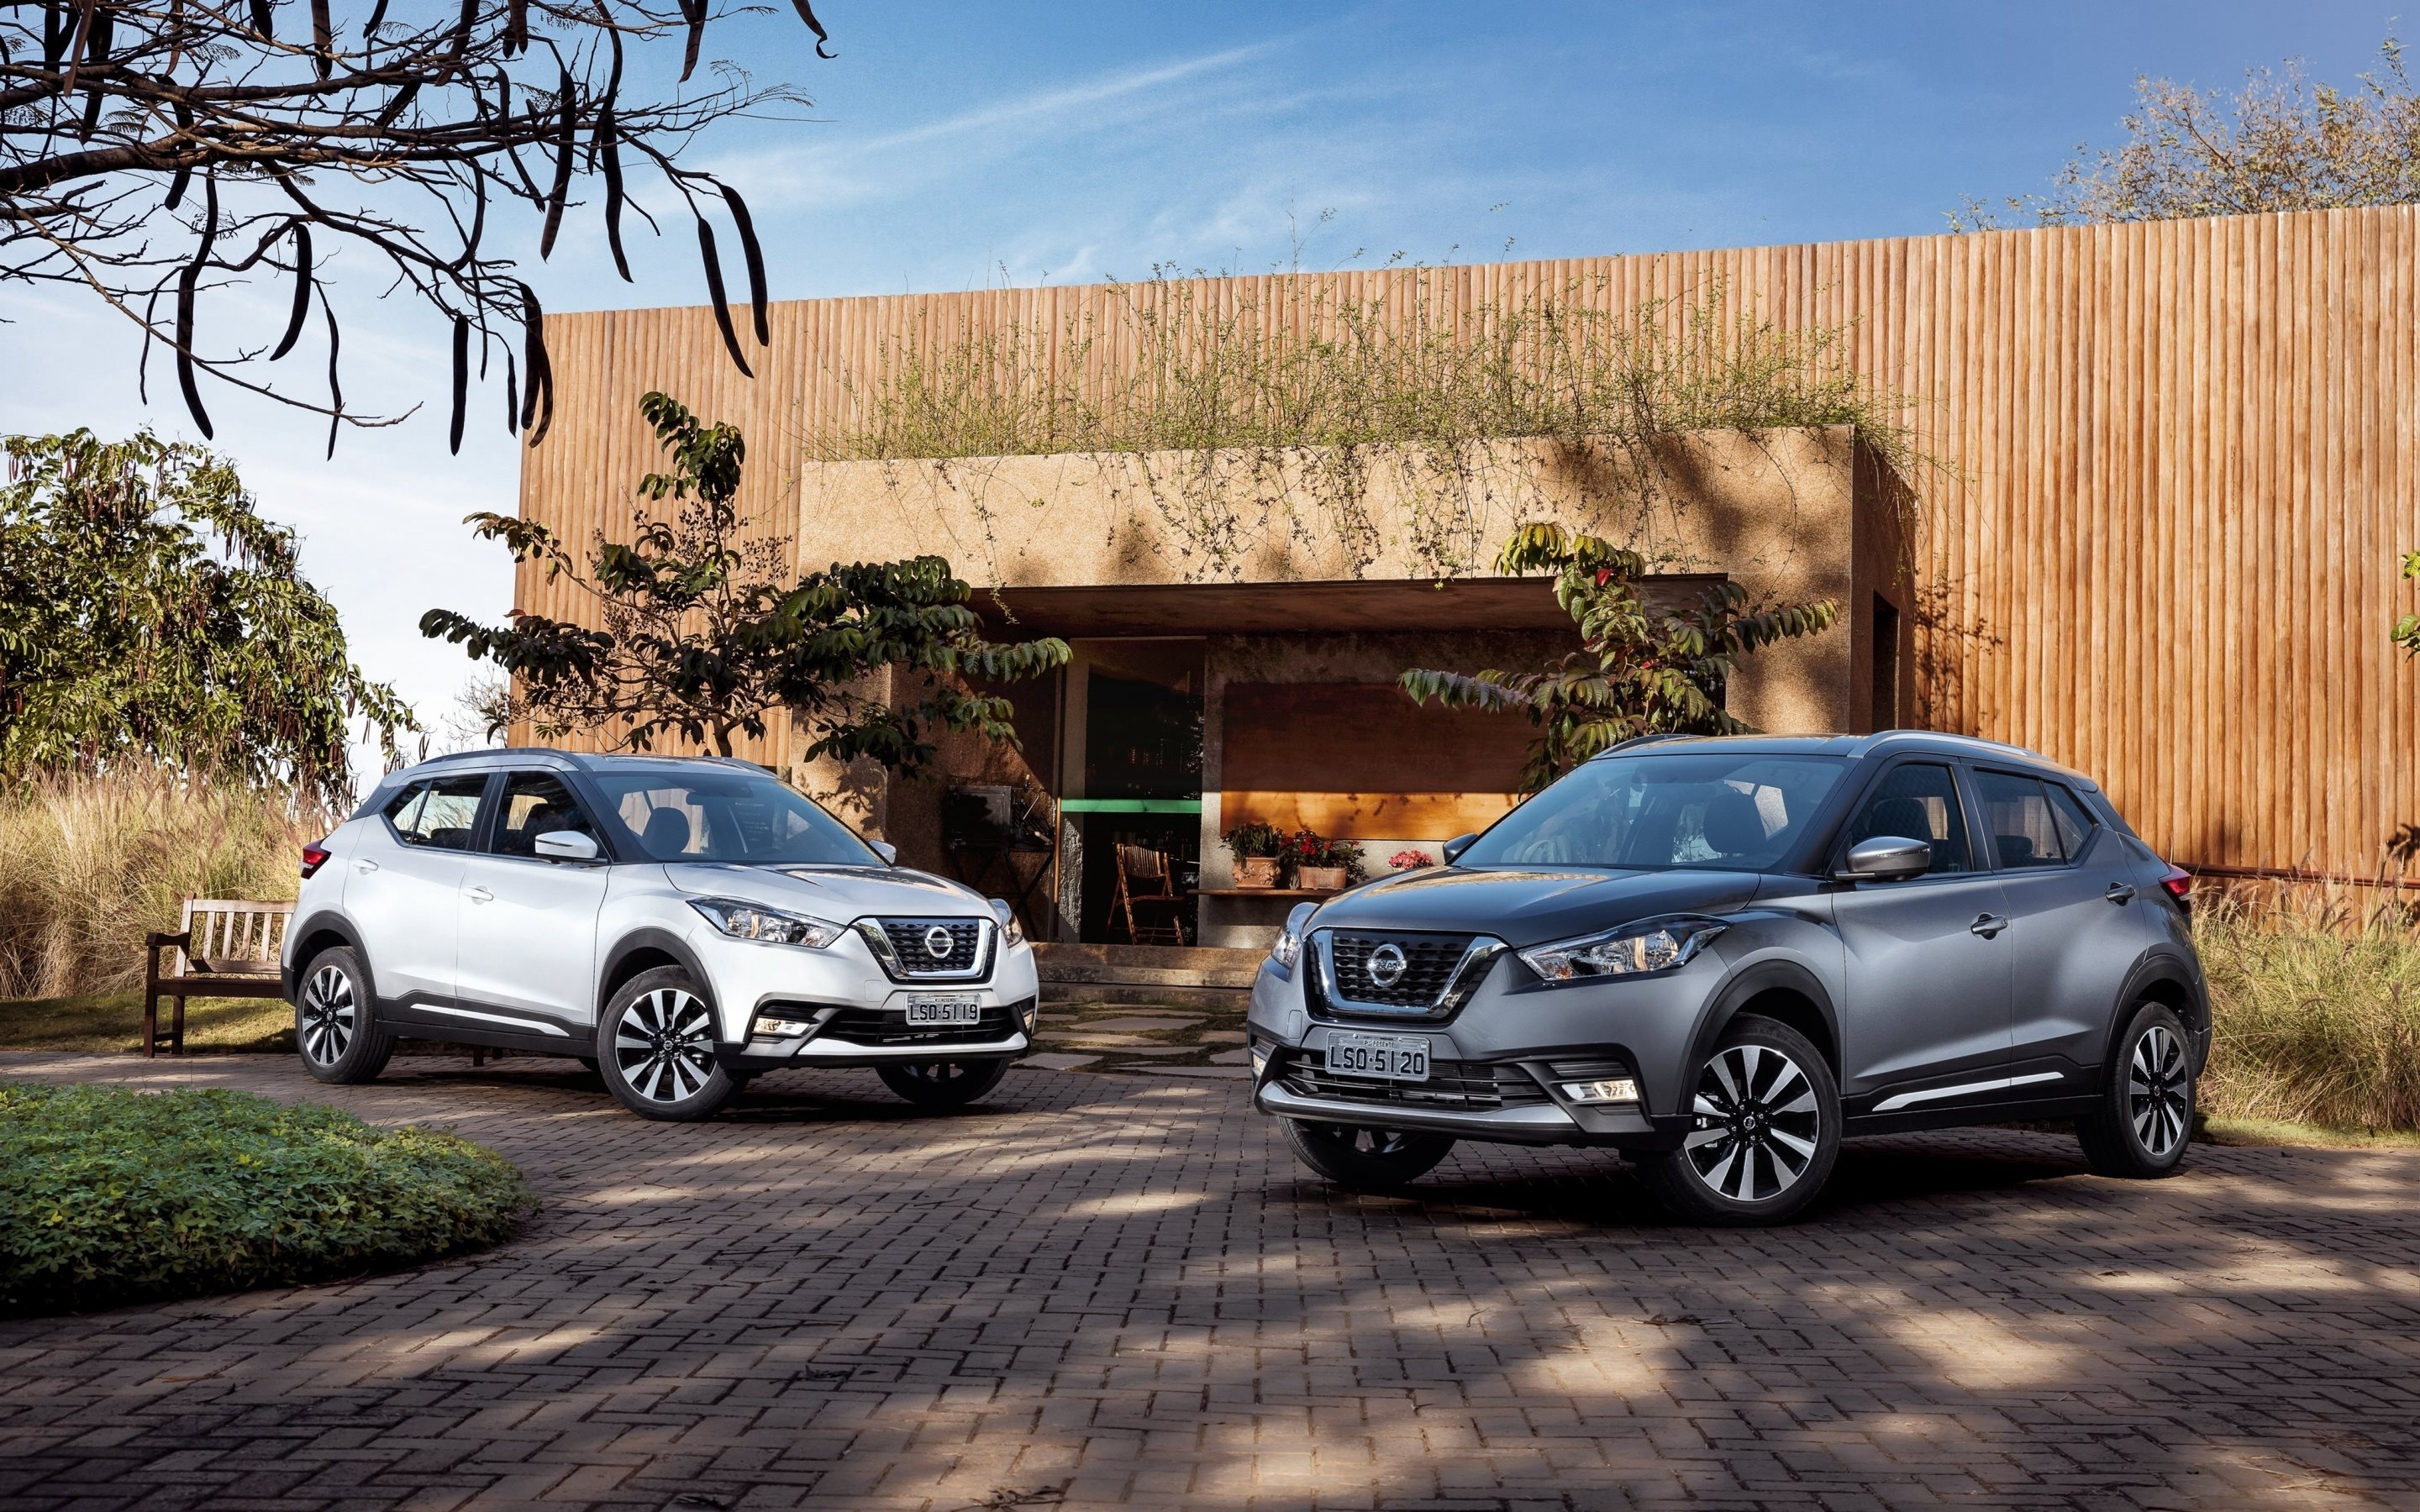 Nissan Kicks, 2016 model, Crossovers, White and gray color options, 2880x1800 HD Desktop